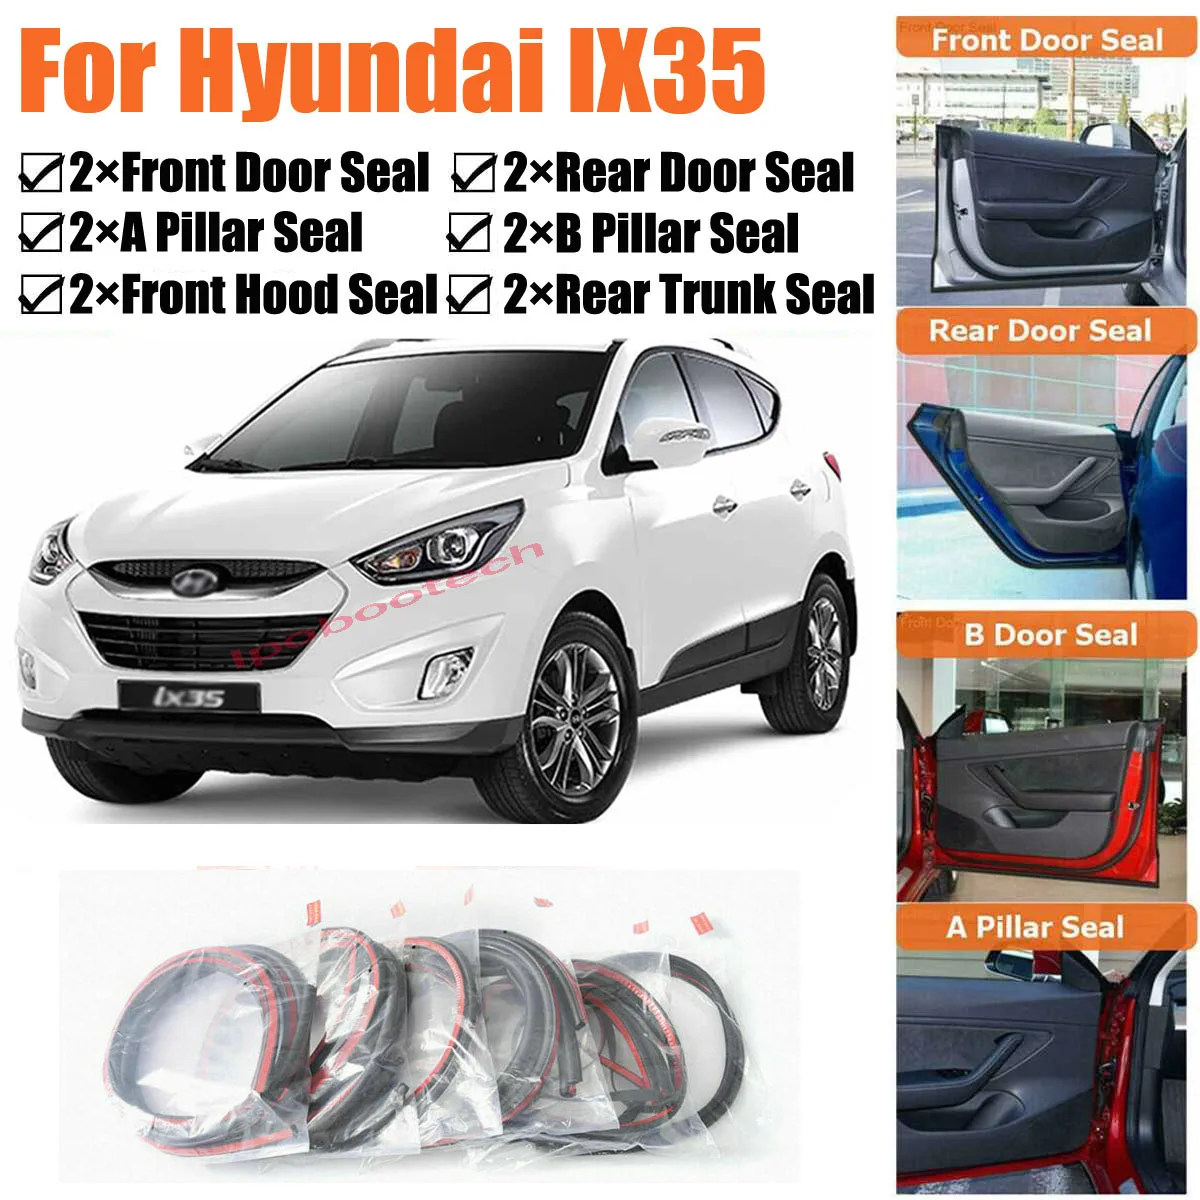 Brand New Car Door Seal Kit Soundproof Rubber Weather Draft Seal Strip Wind Noise Reduction  Fit For Hyundai IX35